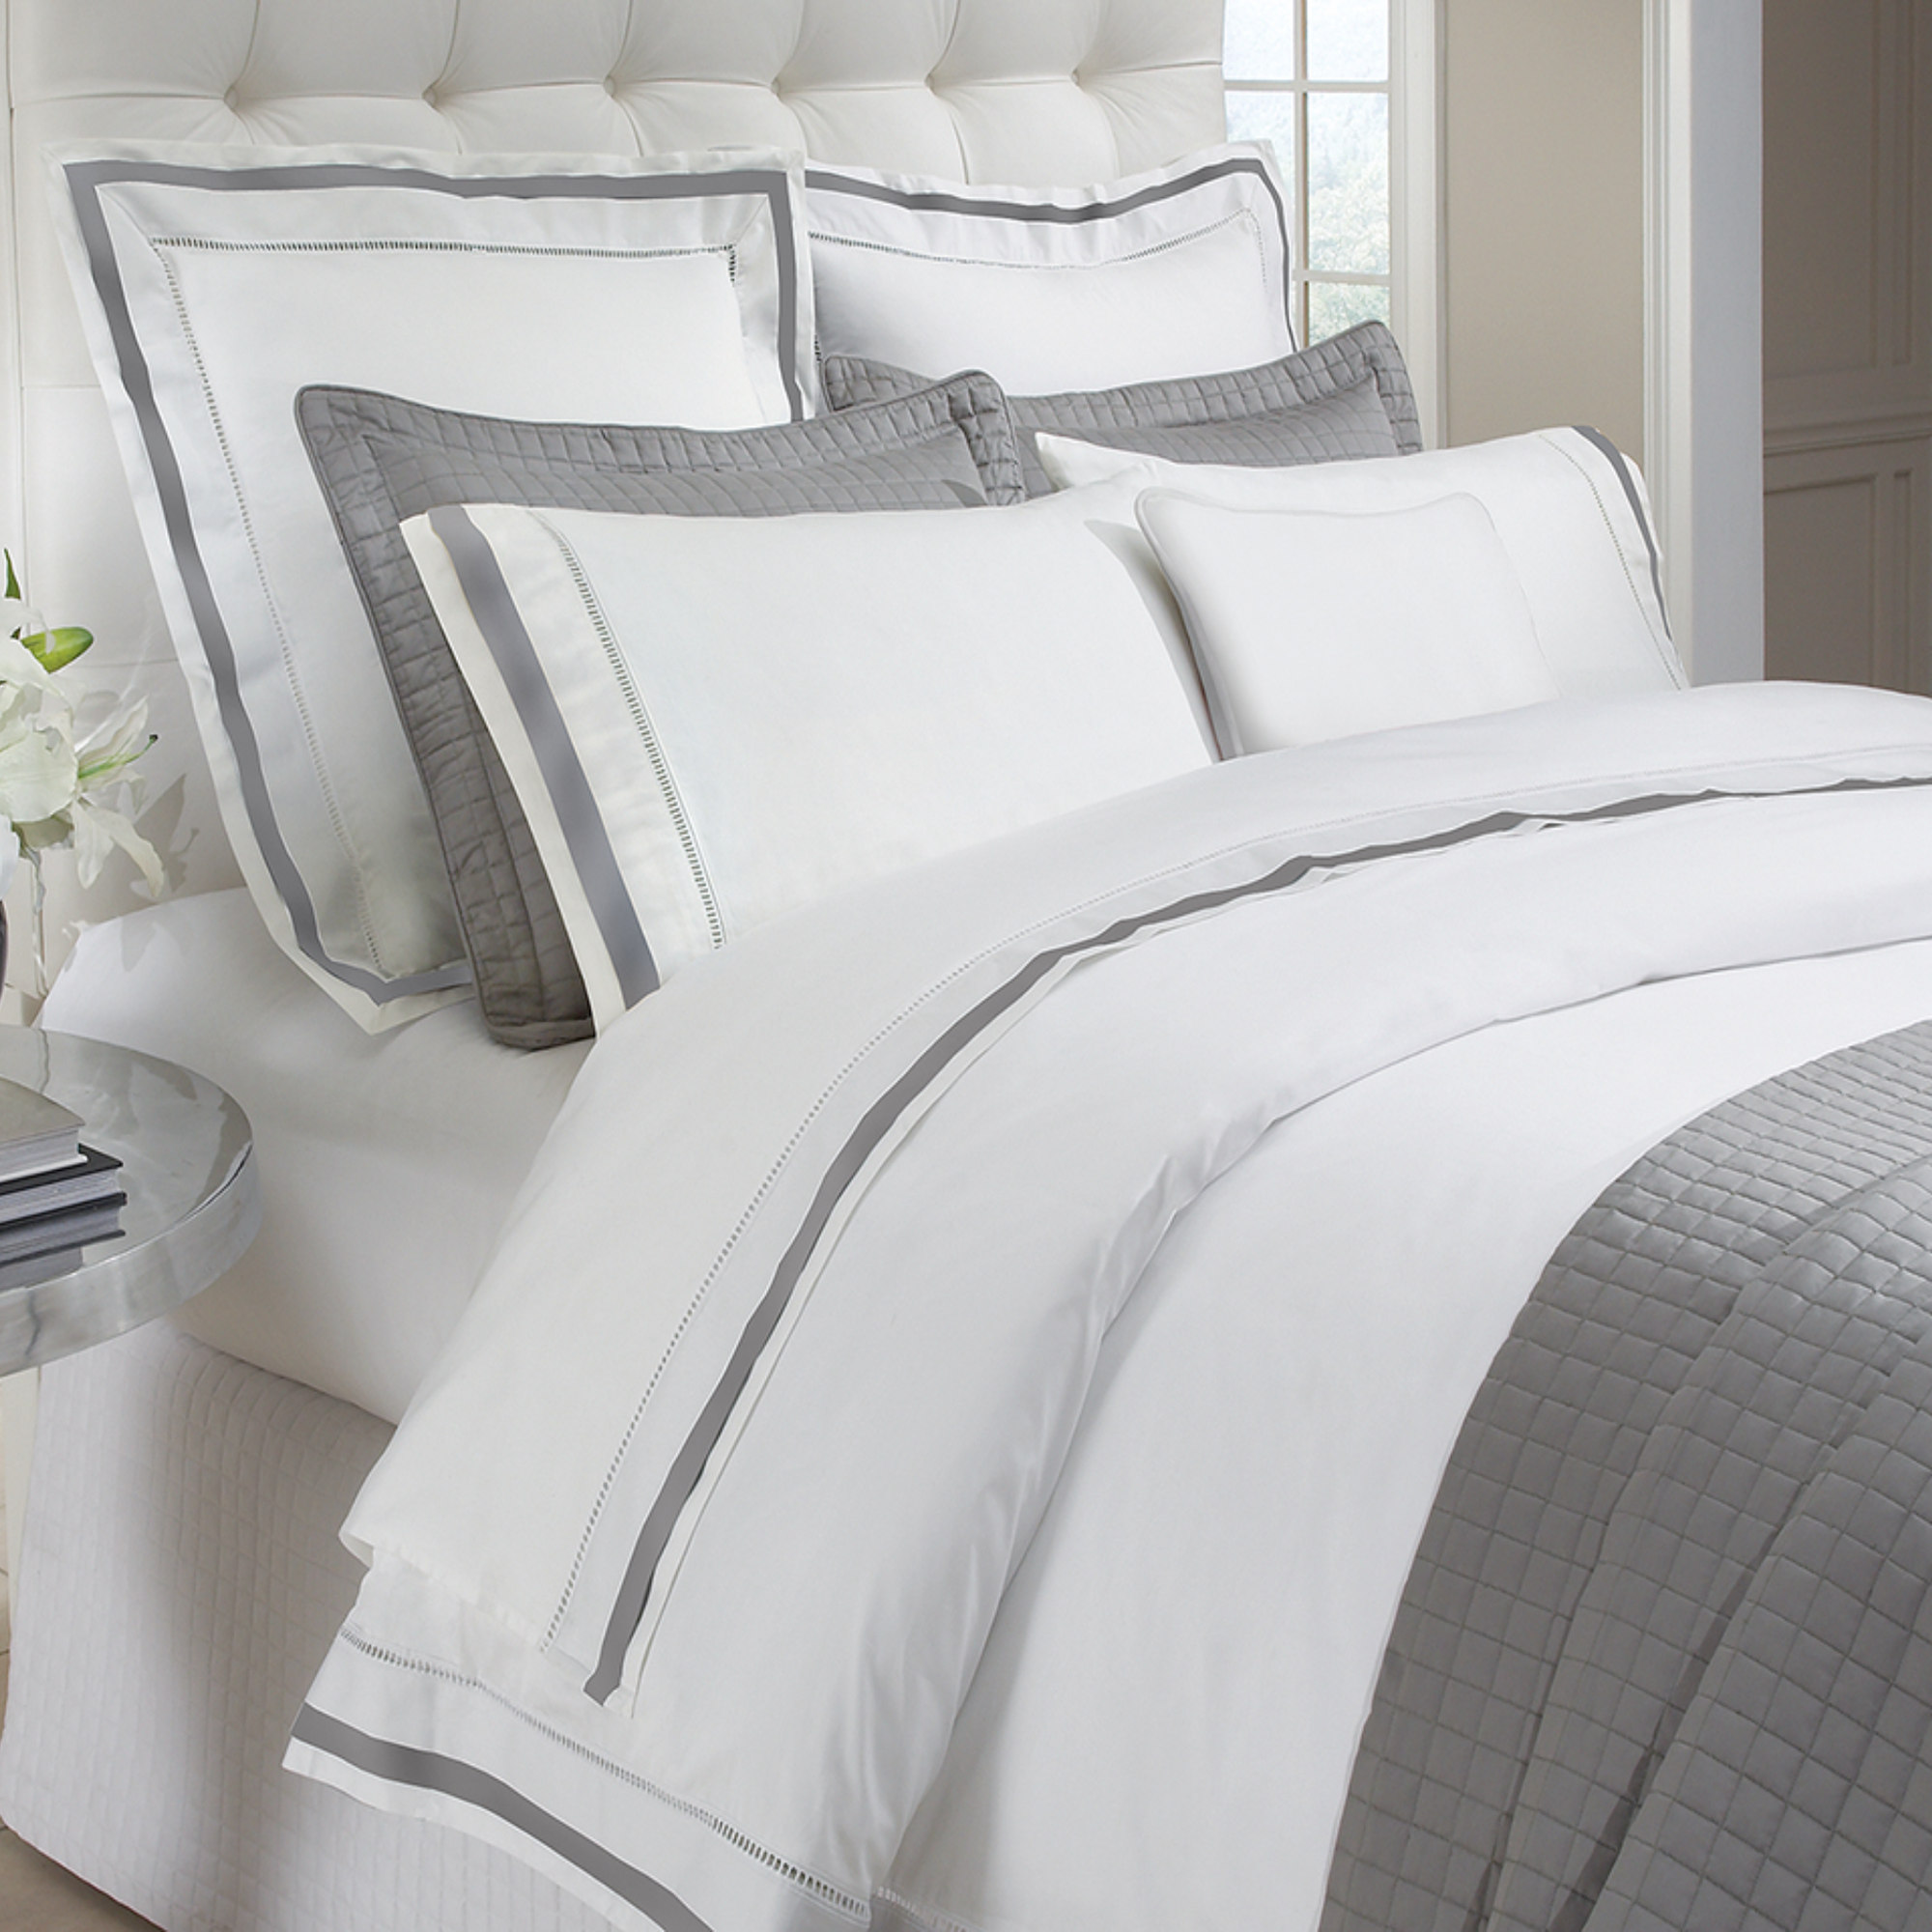 Full Bed in Downtown Company Urban Quilted Coverlets and Shams in Gray Color with Coordinate